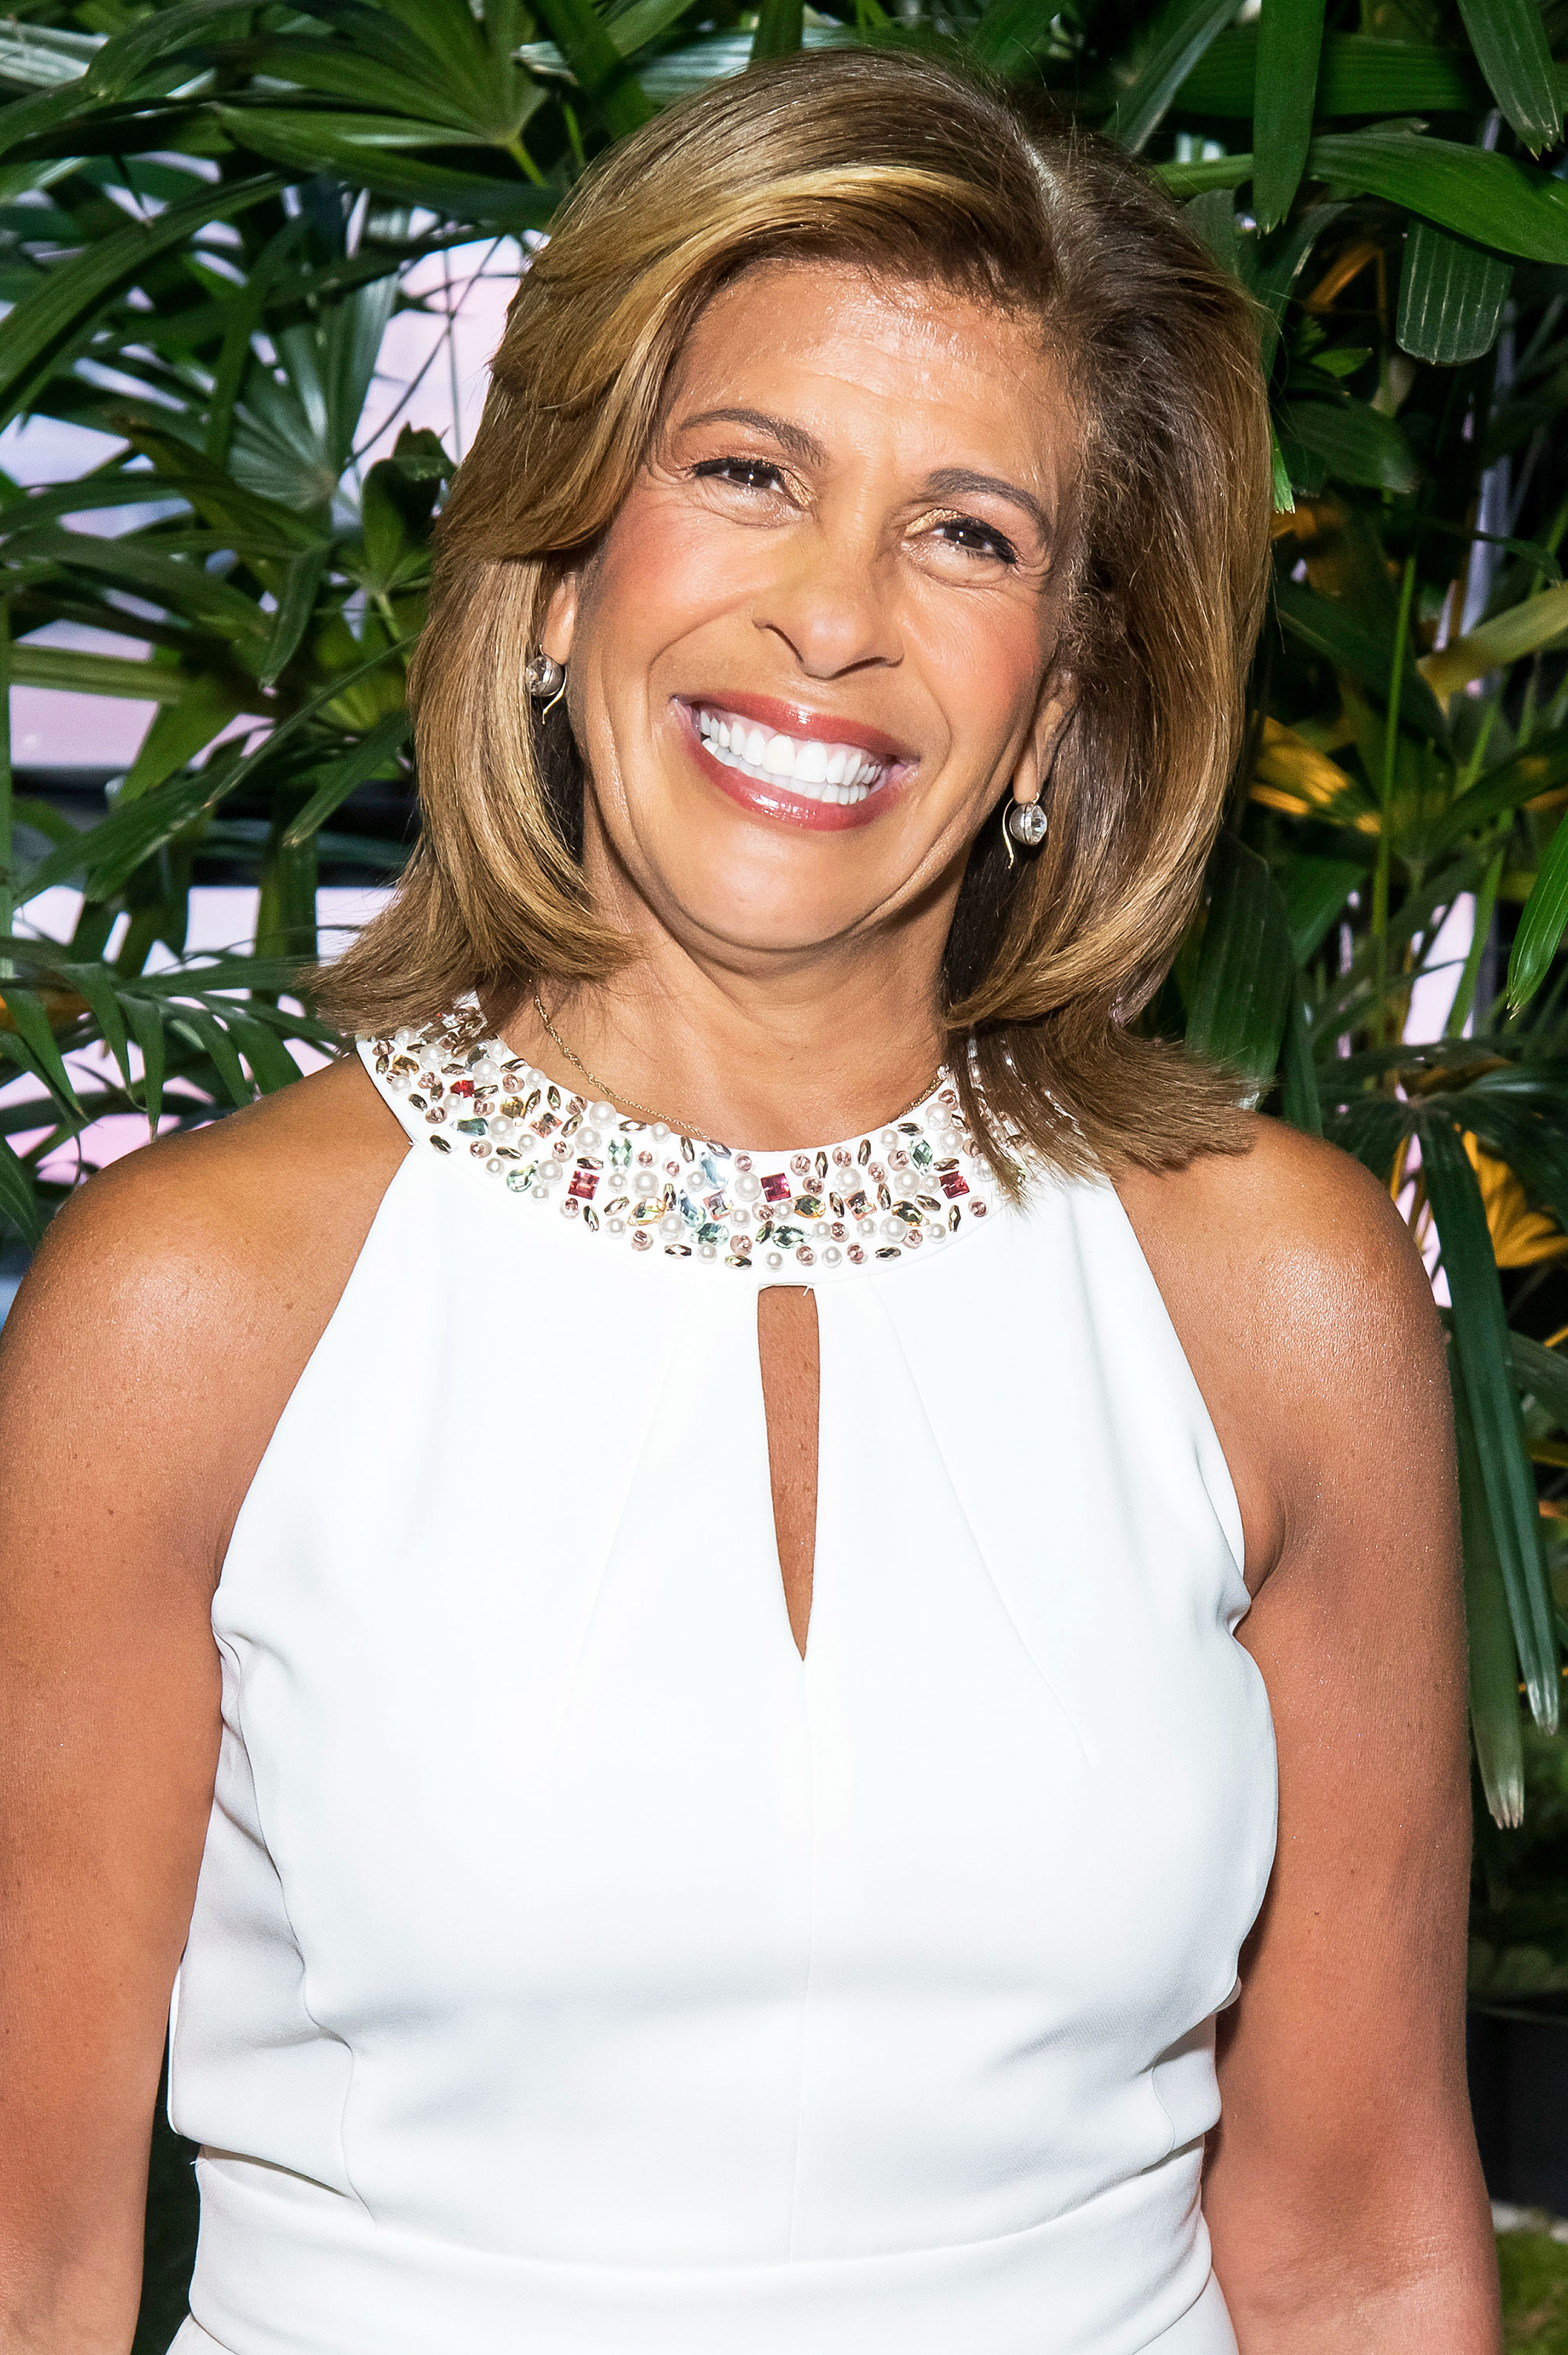 Hoda Kotb Reveals Her Mom Is Helping Pick Out Her Wedding Dress